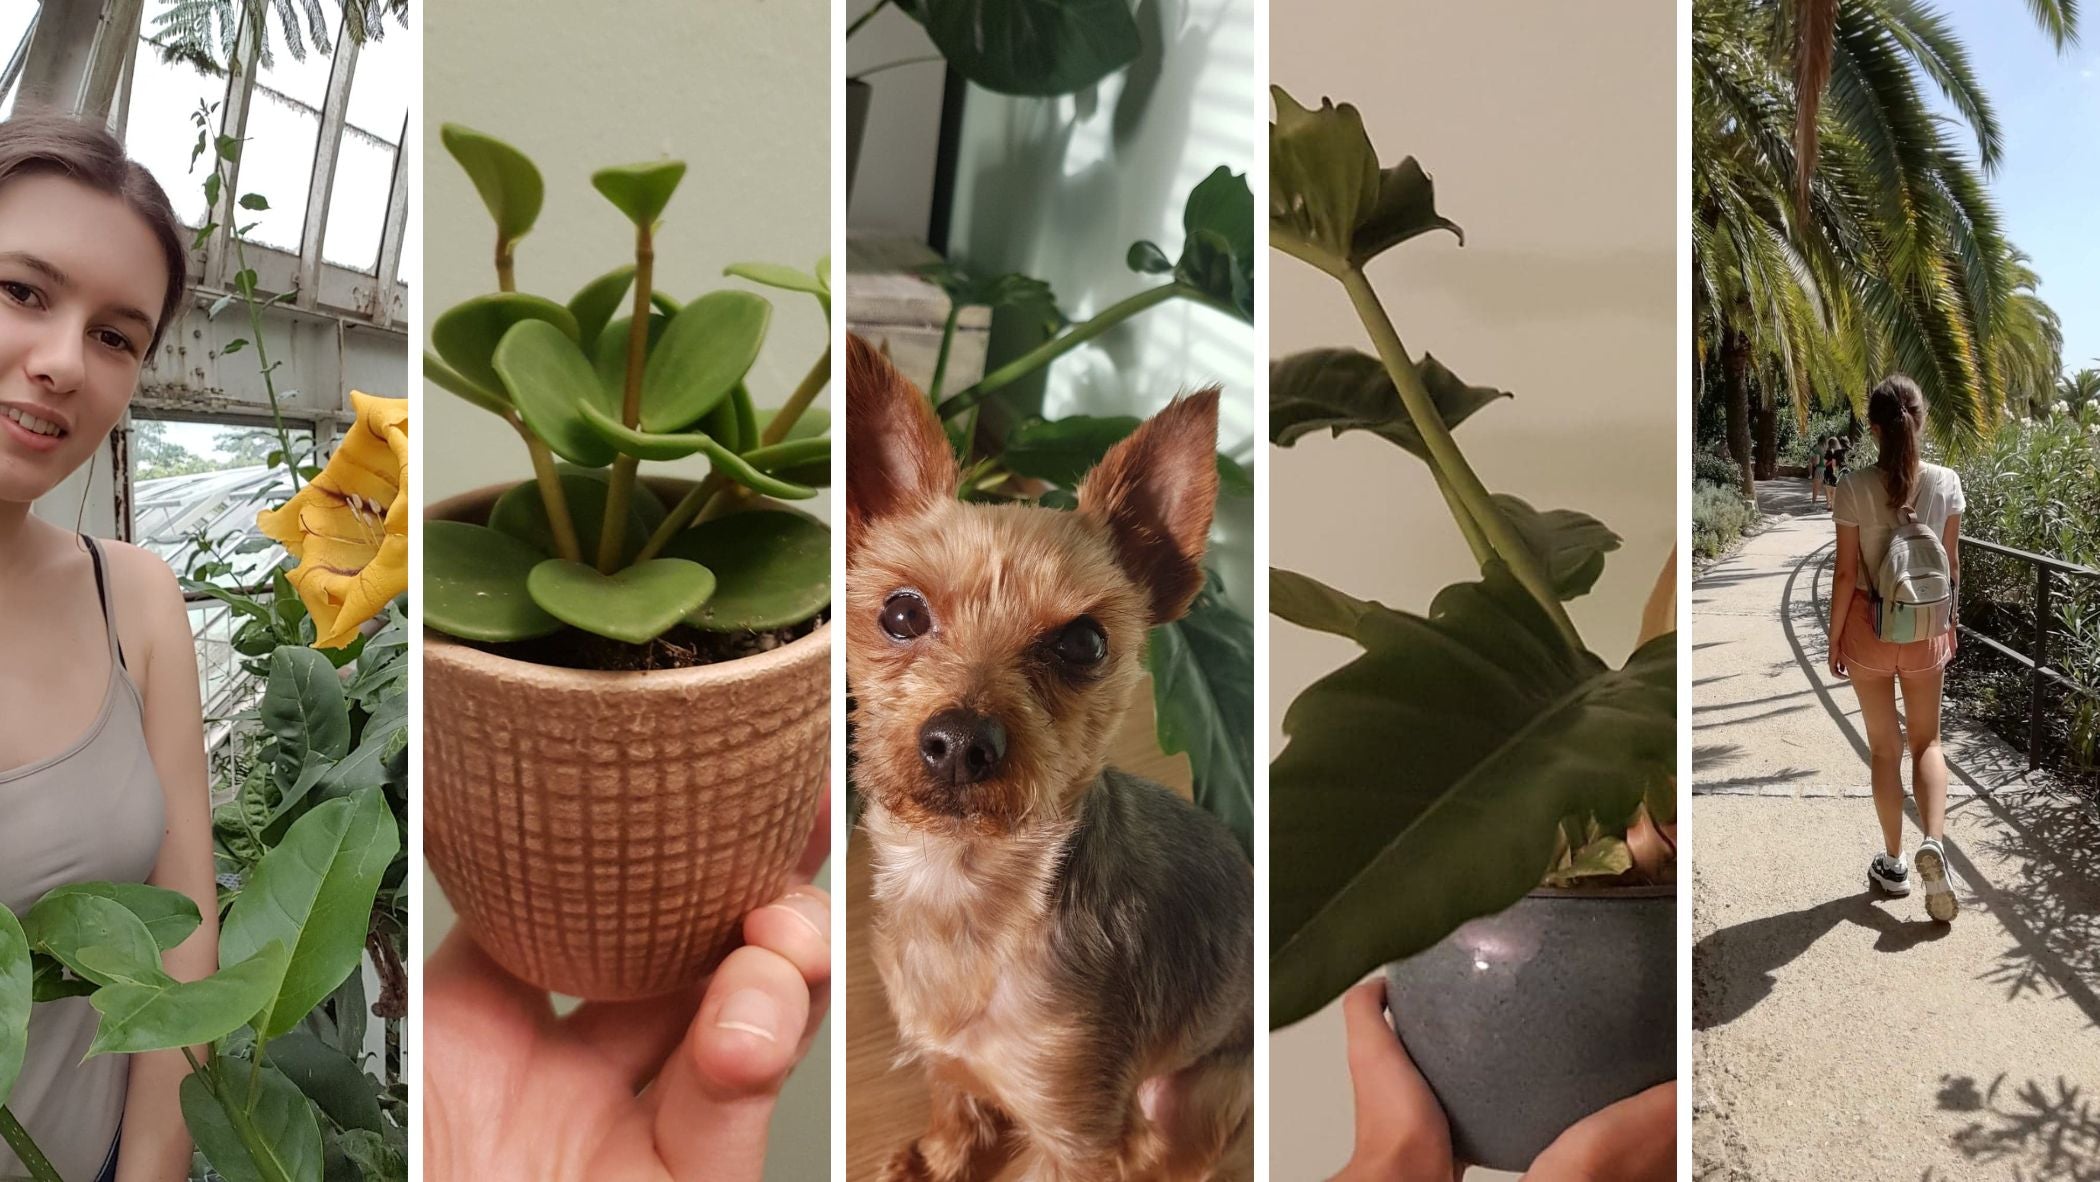 Five photos: Julia with tropical yellow flower, one of her pot plants, Adi her dog, another pot plant, and walking down a plant lined path on holiday